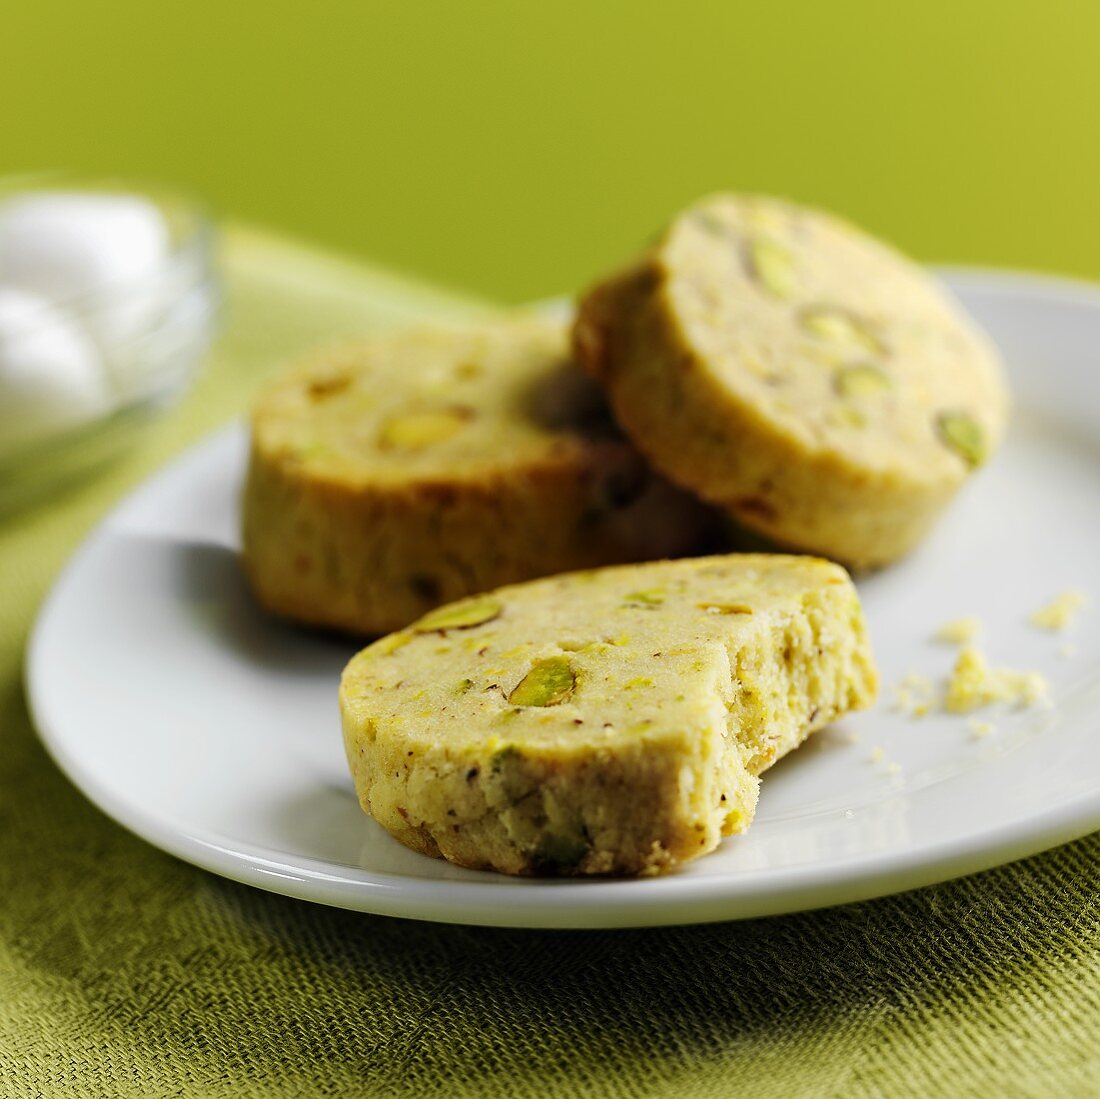 Pistachio biscuits on white plate